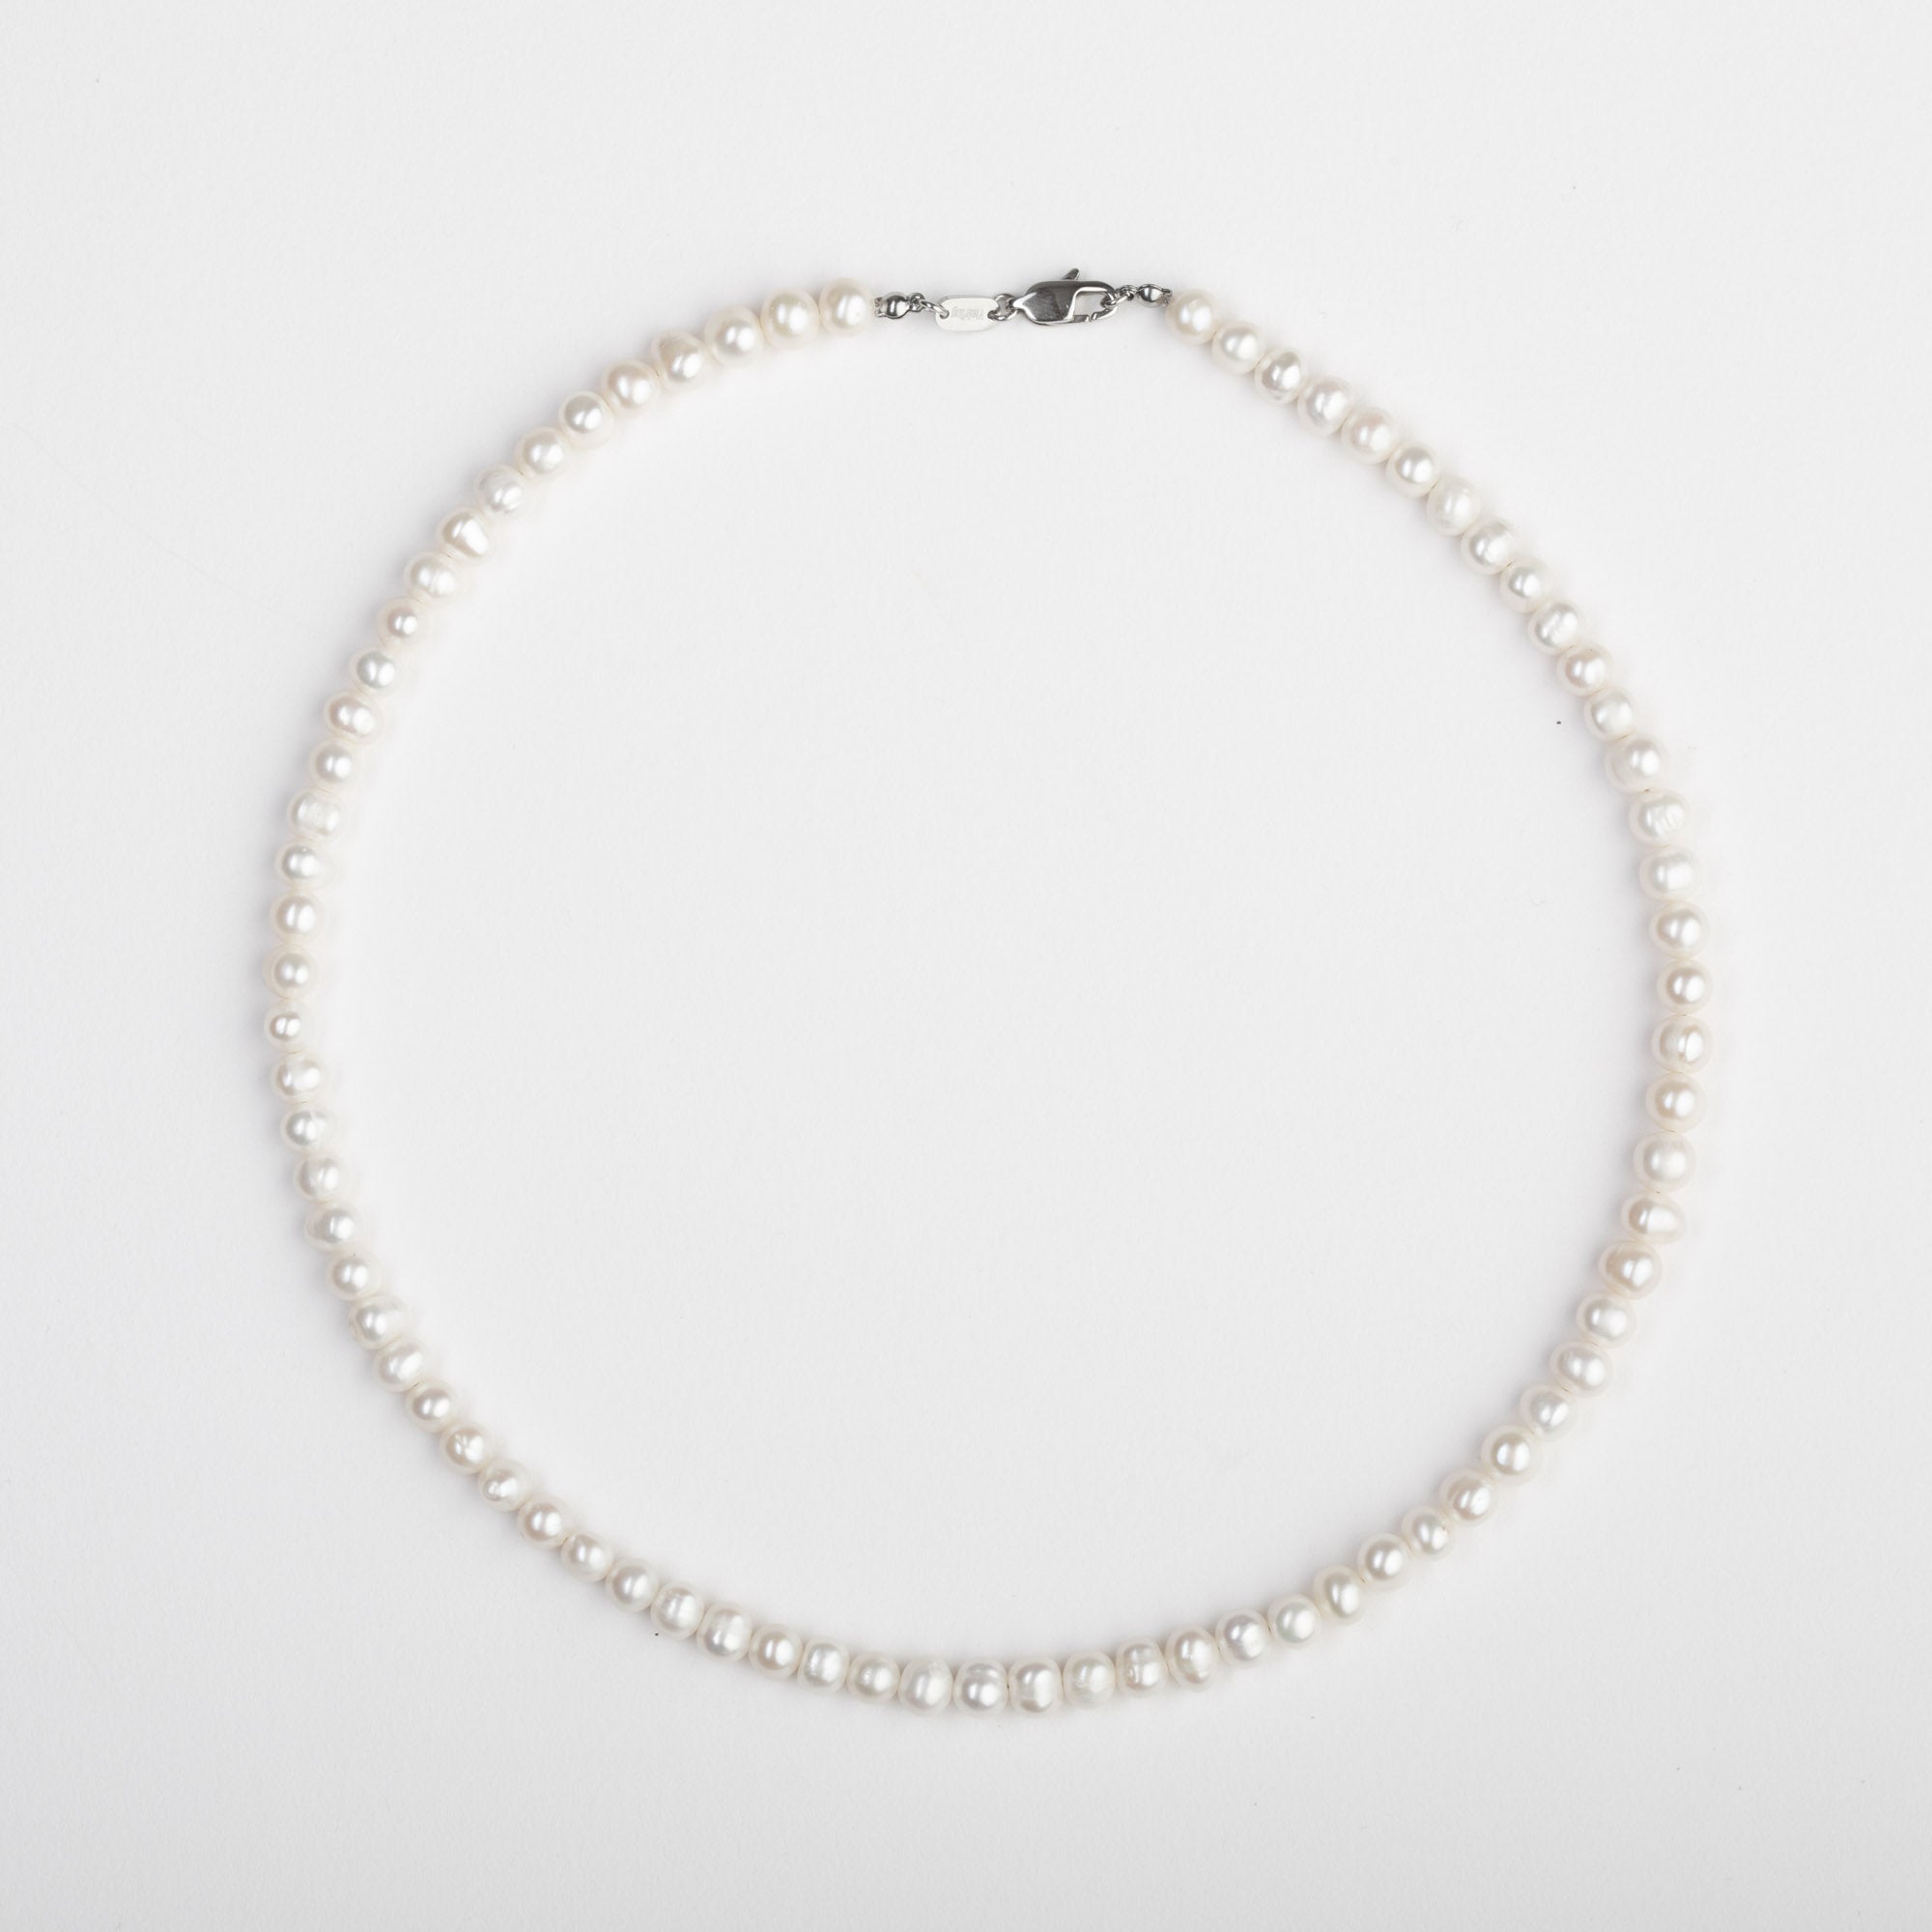 Freshwater Pearl Necklace - Round Pearls